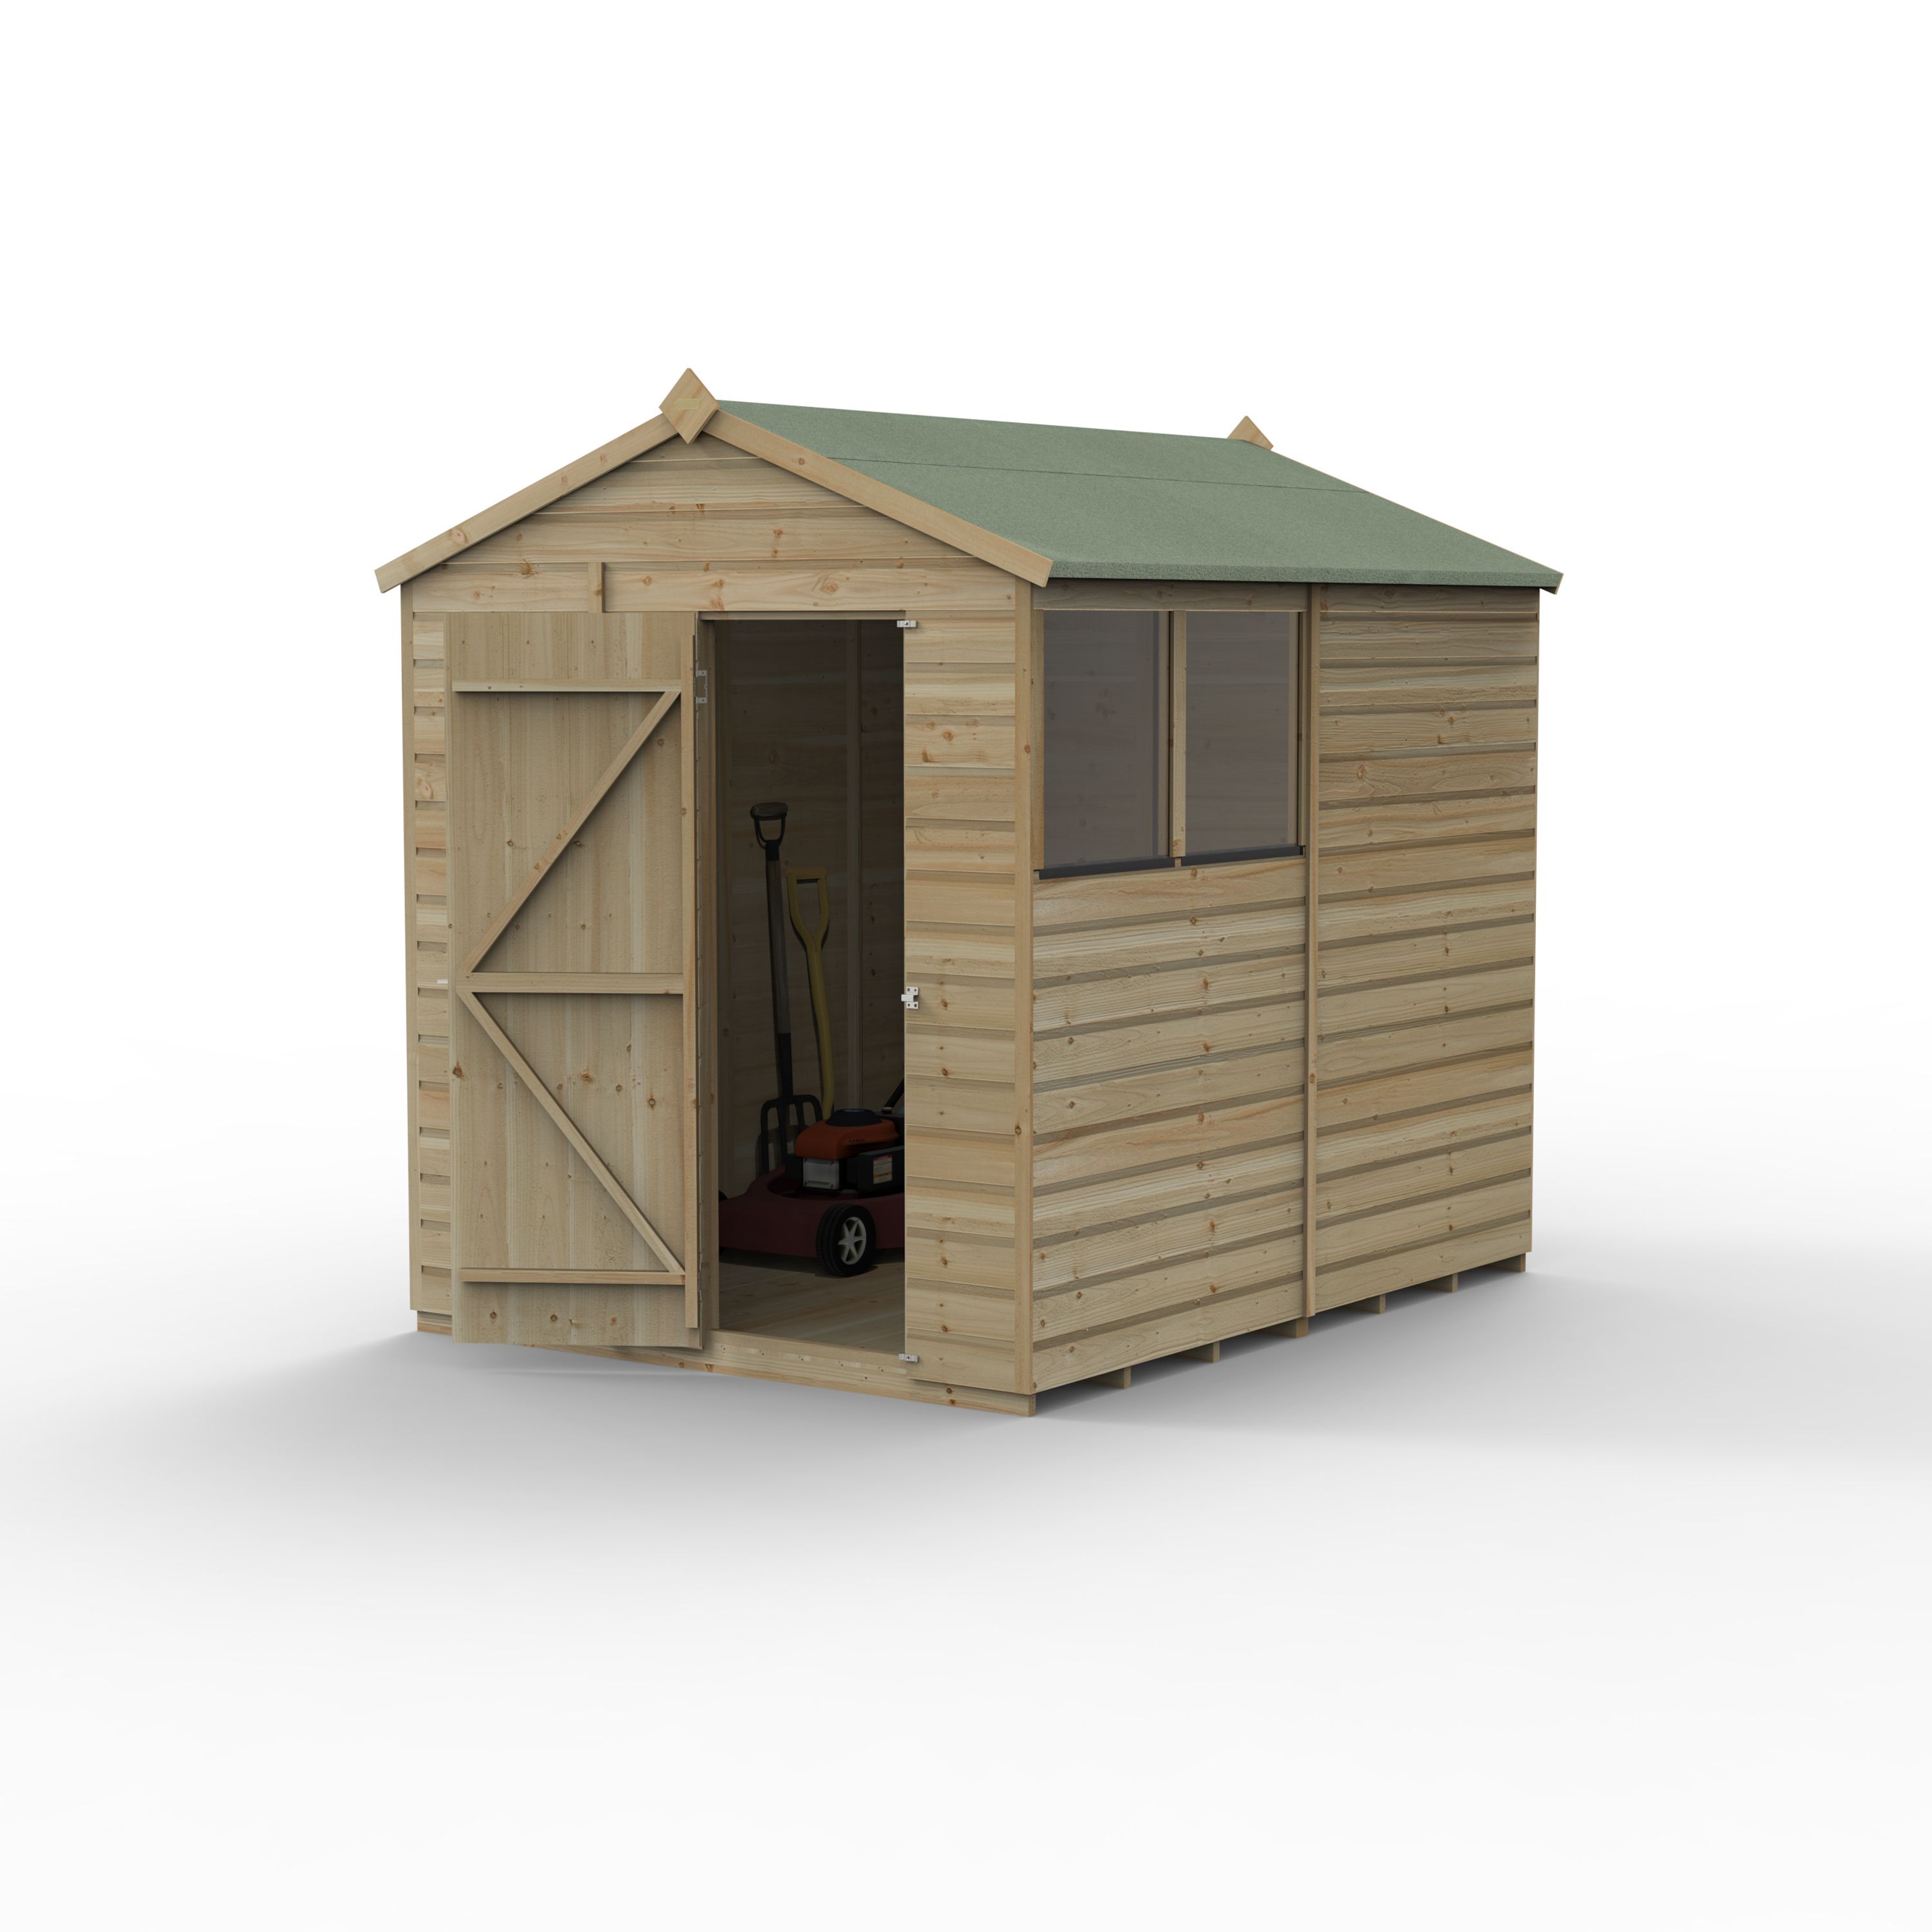 Forest Garden Beckwood 8x6 ft Apex Natural timber Wooden Shed with floor & 2 windows - Assembly not required